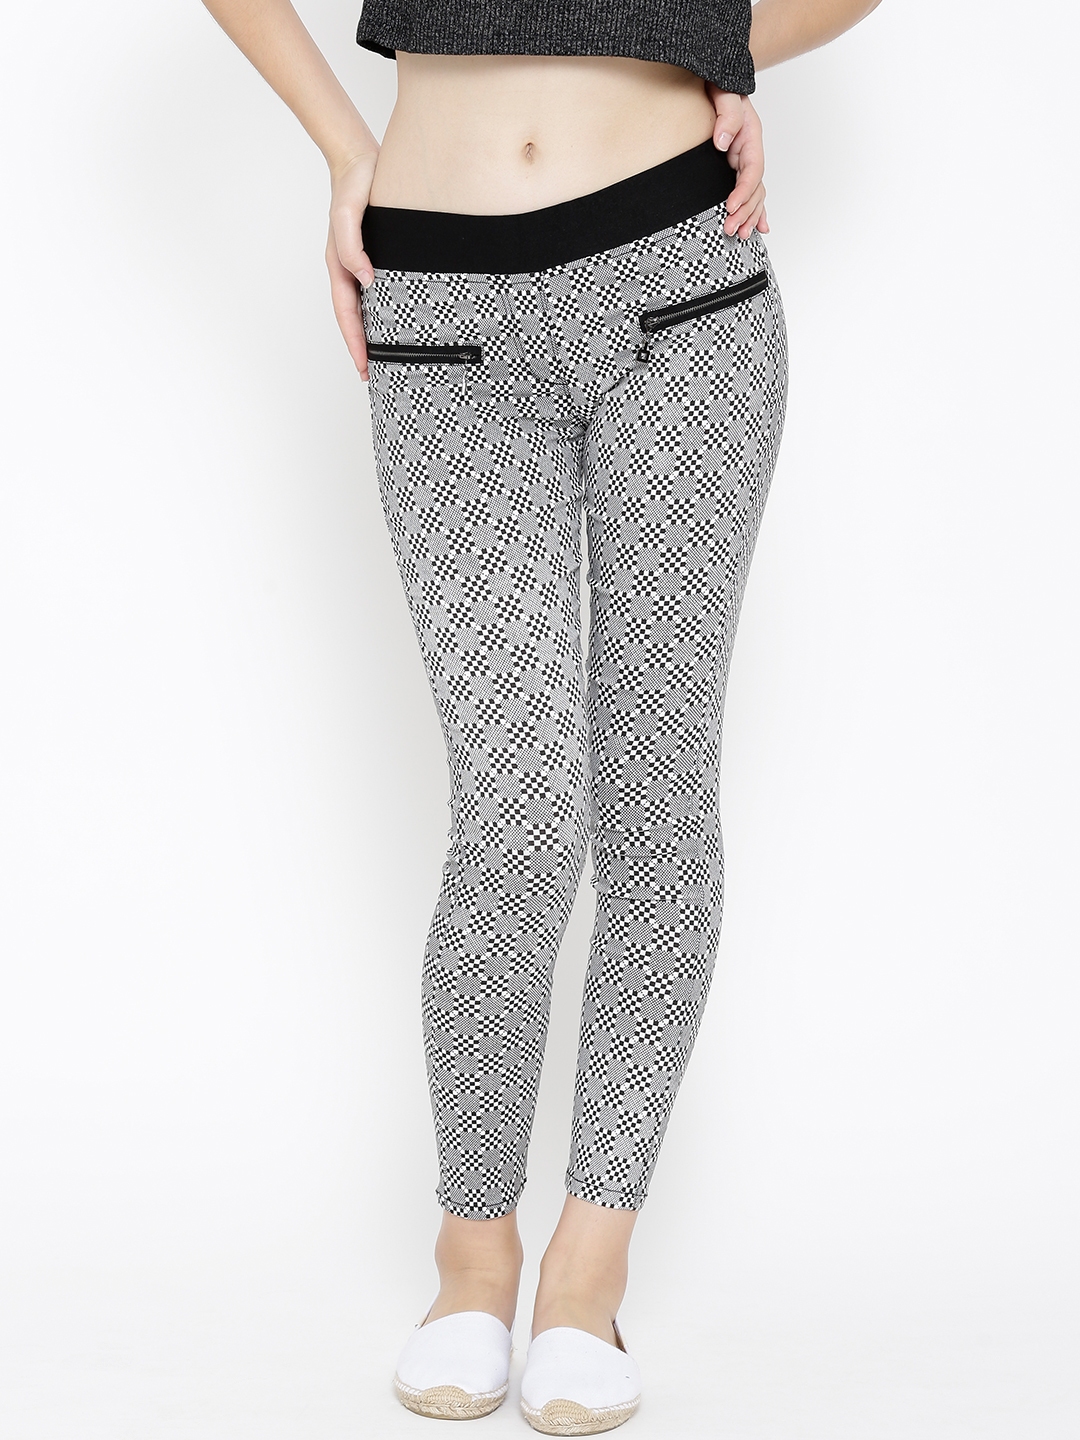 black and white checkered jeggings